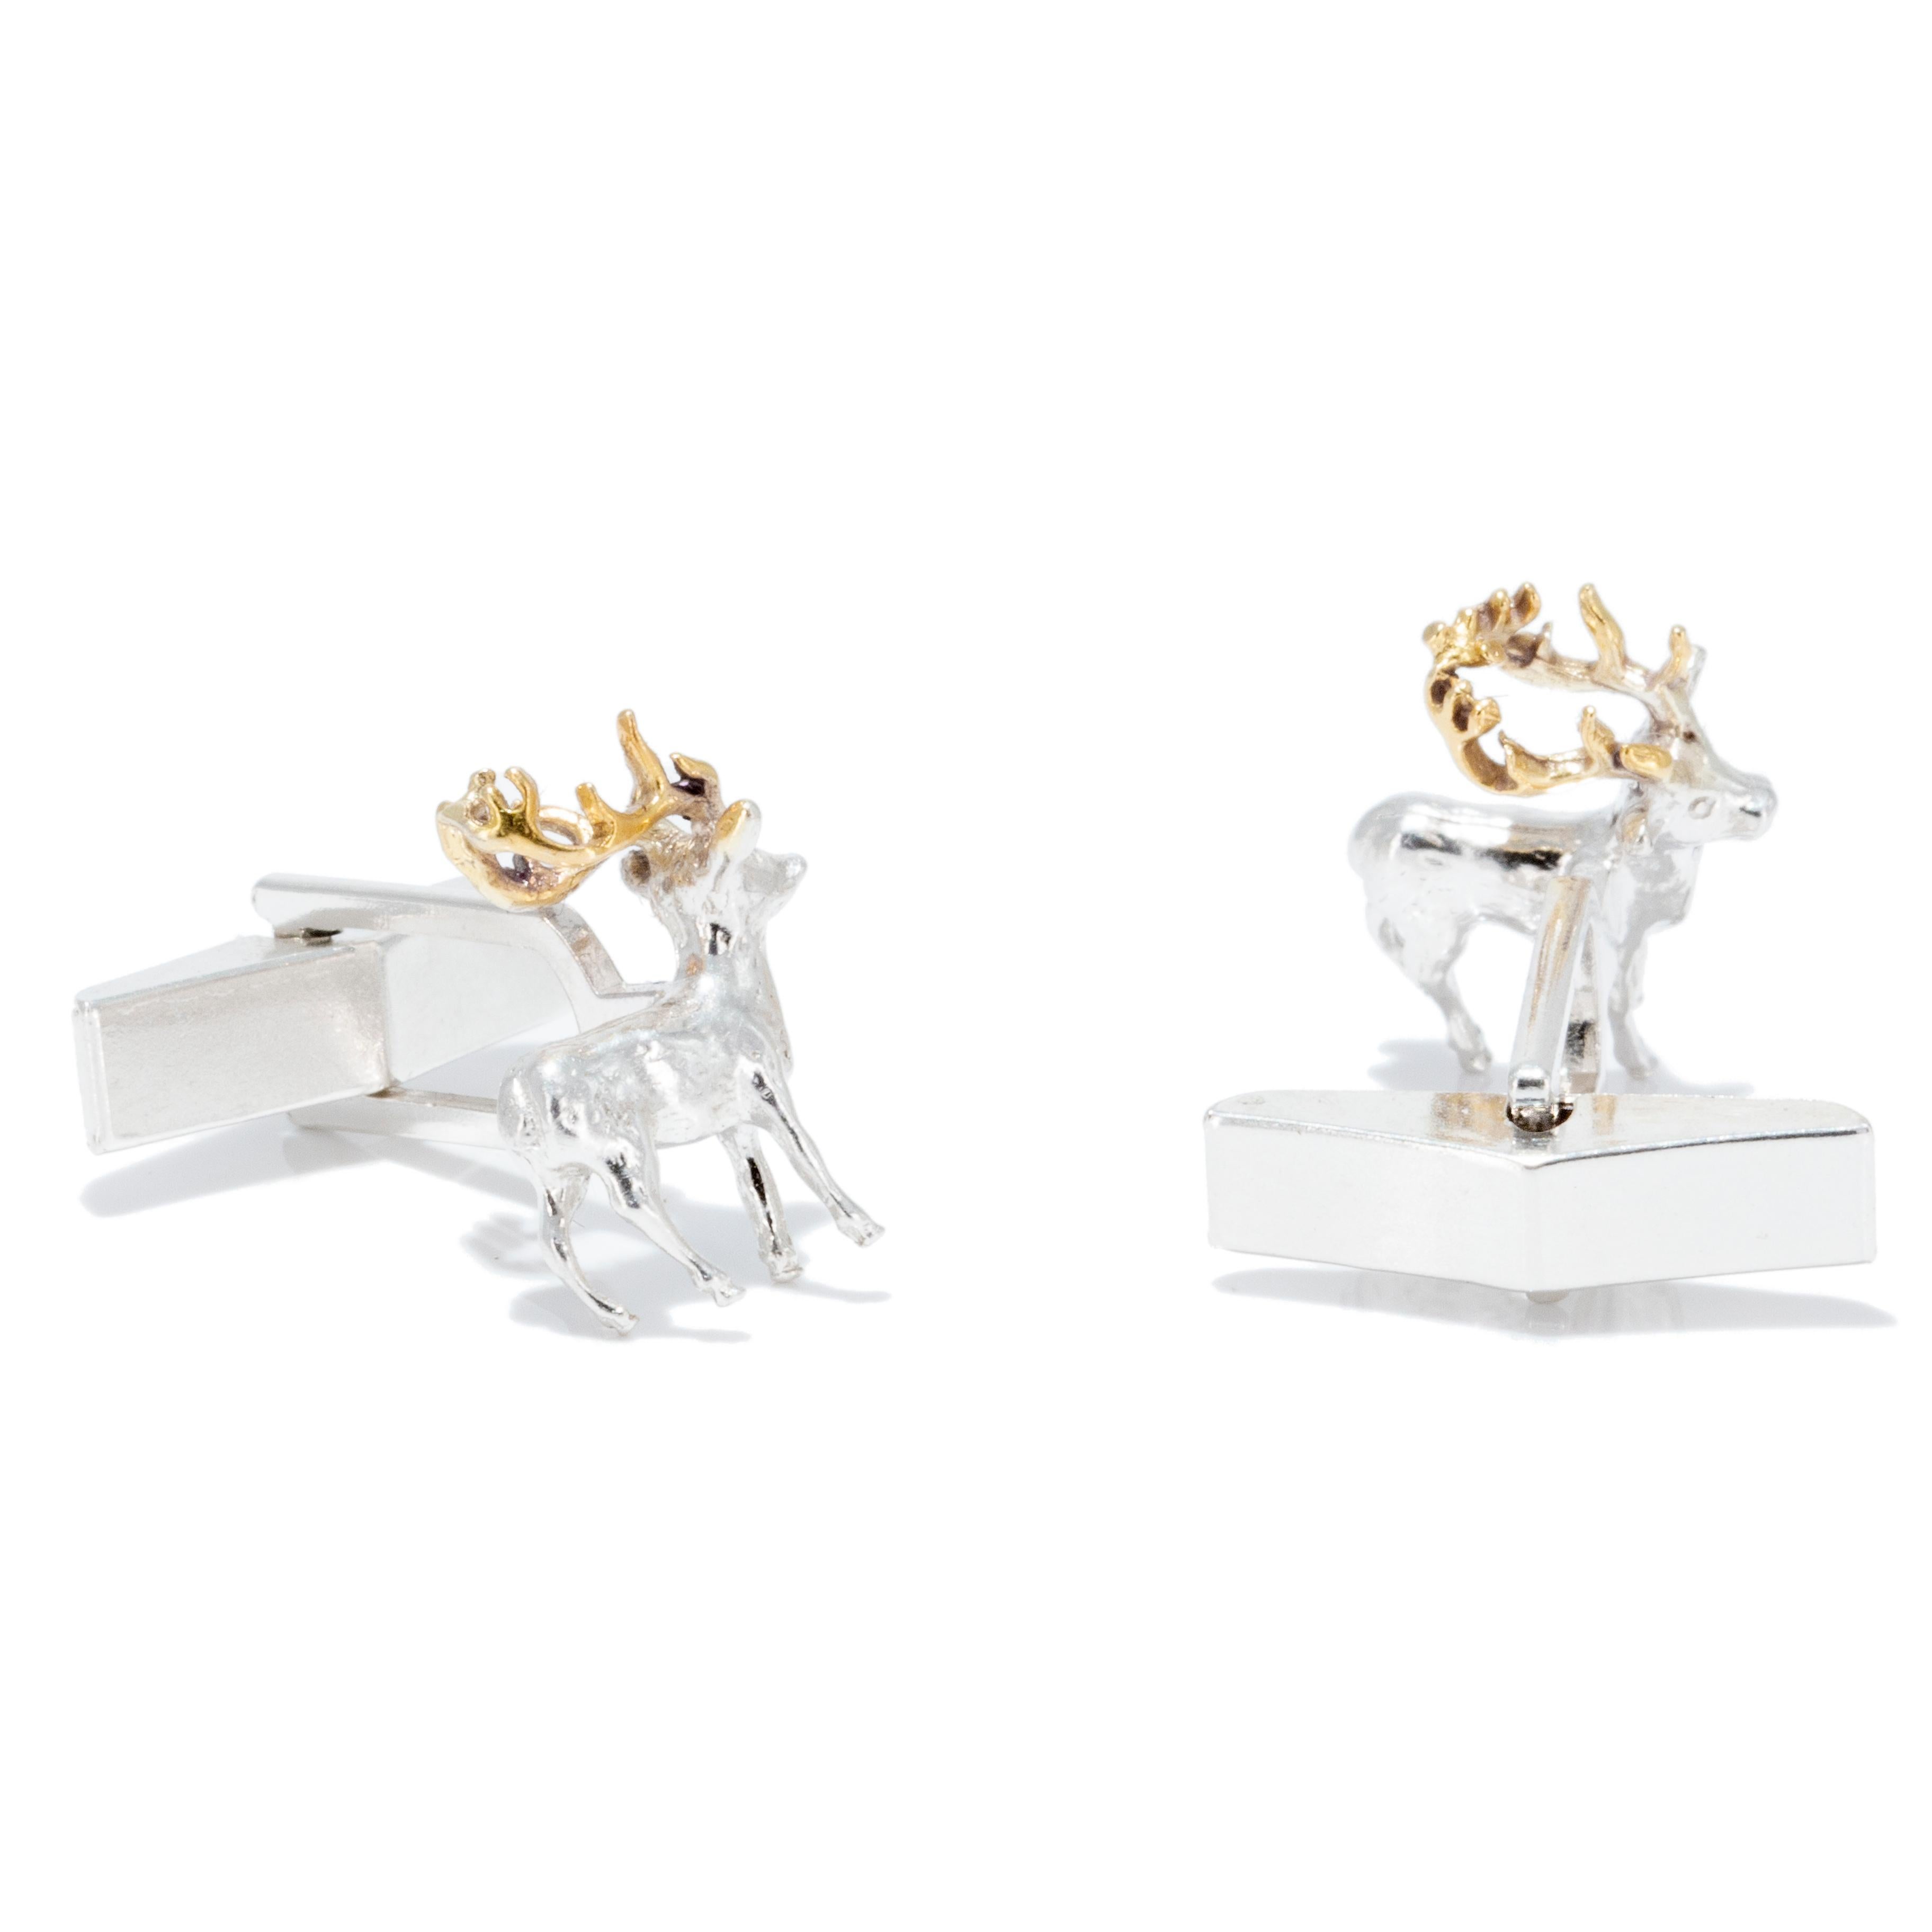 Stag Cufflinks in 18 Karat Gold on Sterling Silver In New Condition For Sale In London, GB